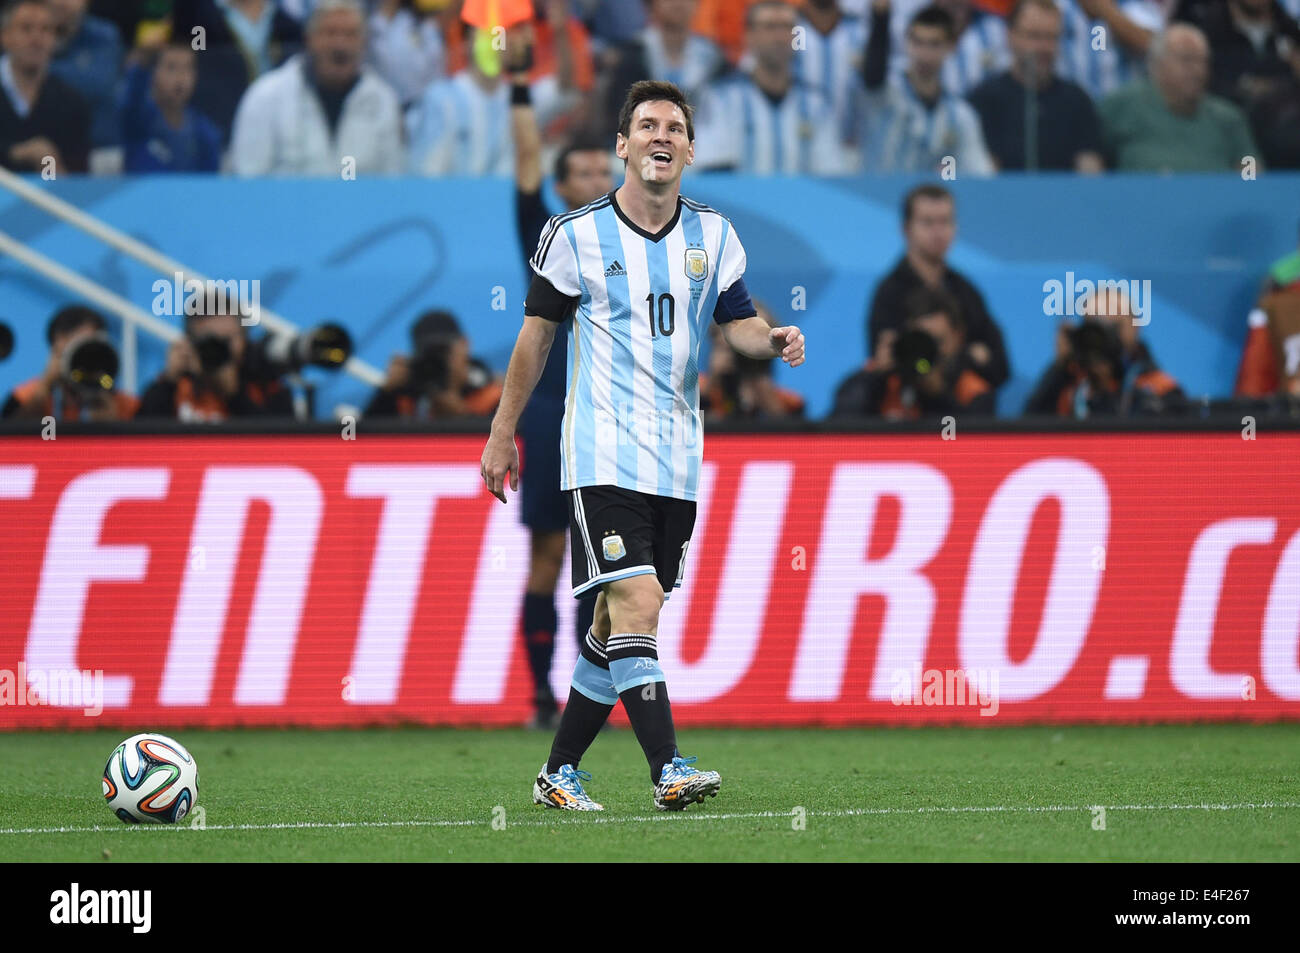 Sao Paulo, Brazil. 09th July, 2014. Lionel Messi of Argentina walks on the pitch during the FIFA World Cup 2014 semi-final soccer match between the Netherlands and Argentina at the Arena Corinthians in Sao Paulo, Brazil, 09 July 2014. Photo: Marius Becker/dpa/Alamy Live News Stock Photo